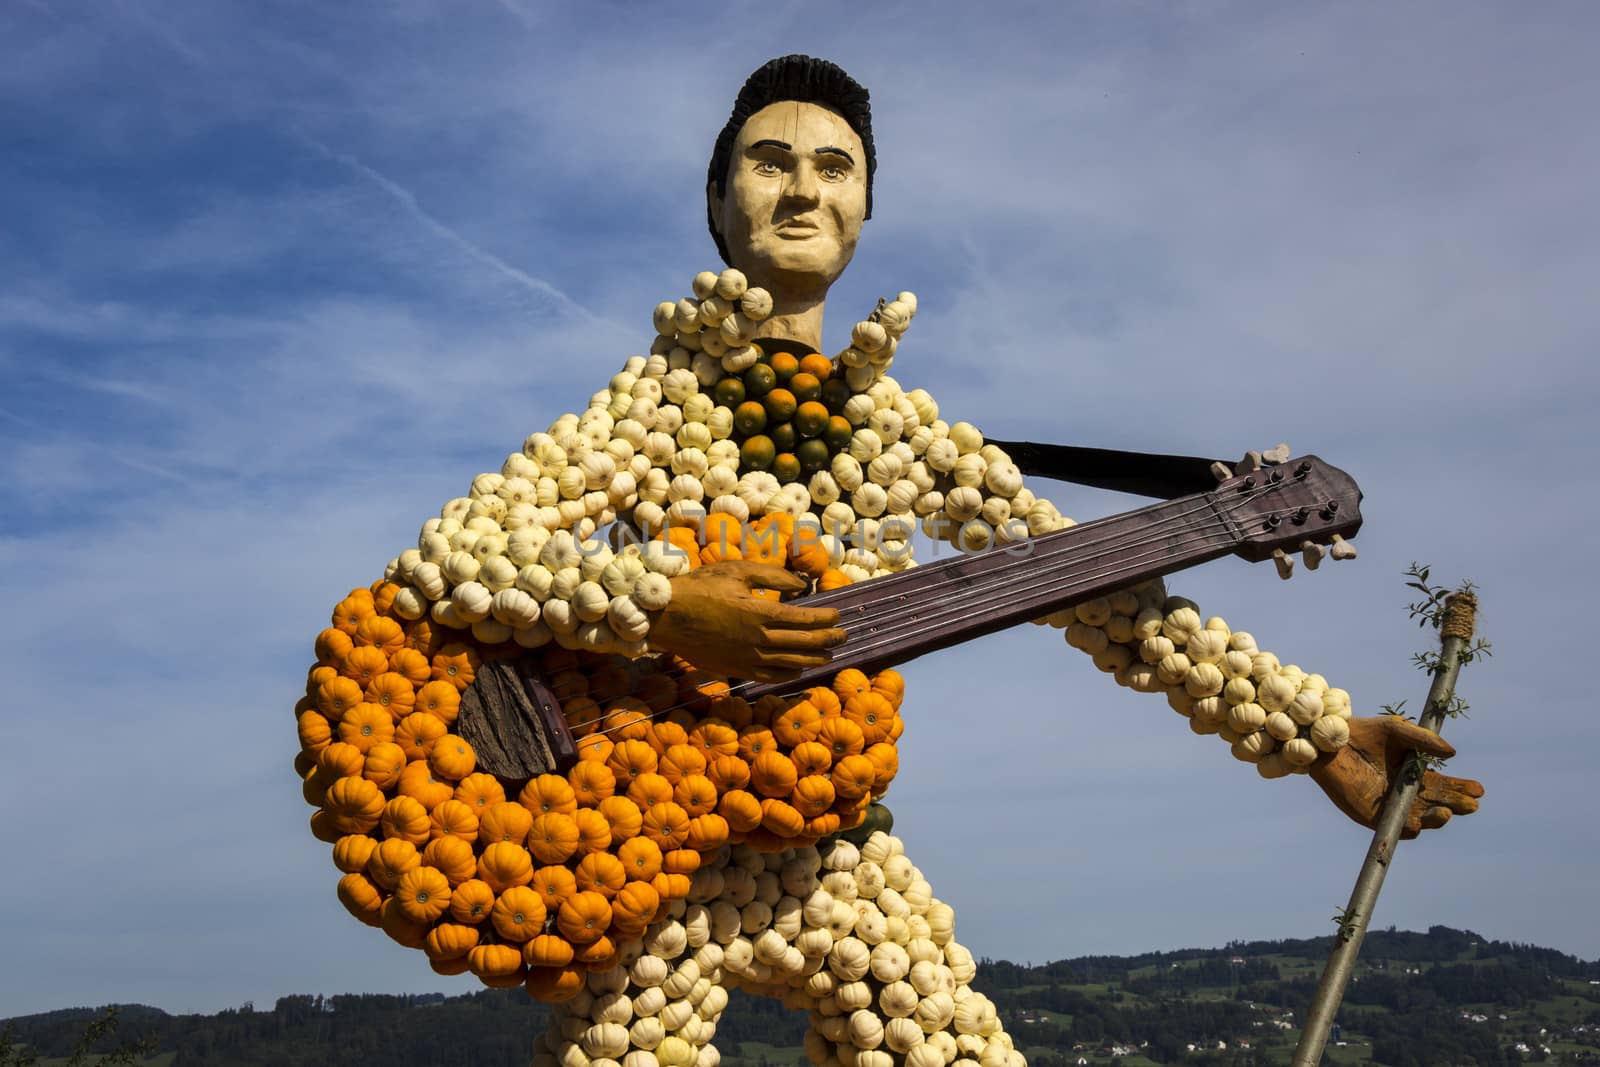 Guitar and guitarist made of small orange, green and wh by snowwhite